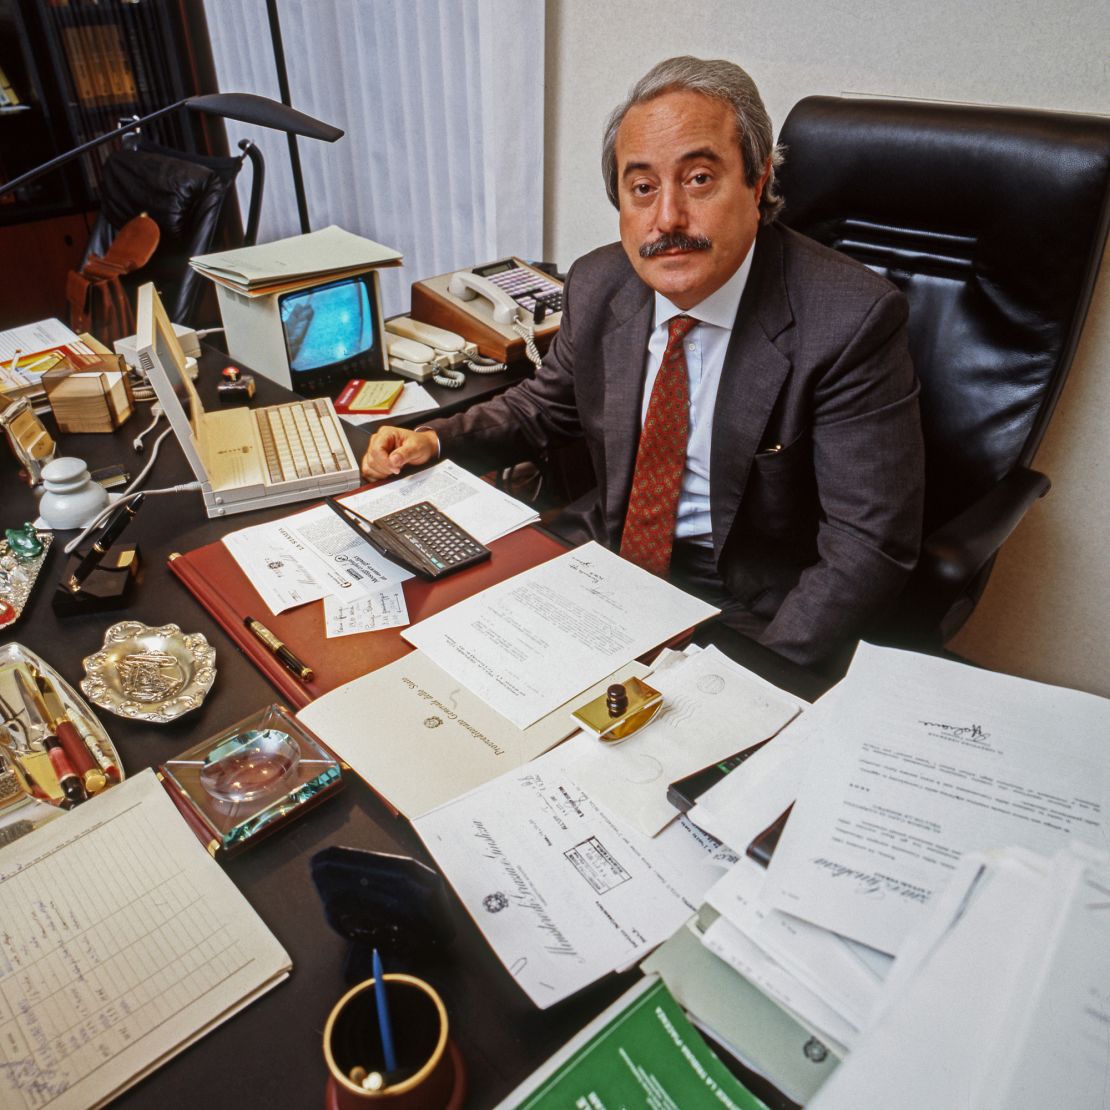 Giovanni Falcone, is seen in his office at the Italian Ministry of Justice in 1991. Matteo Messina Denaro was found guilty of the 1992 murder of Falcone and another prosecutor.